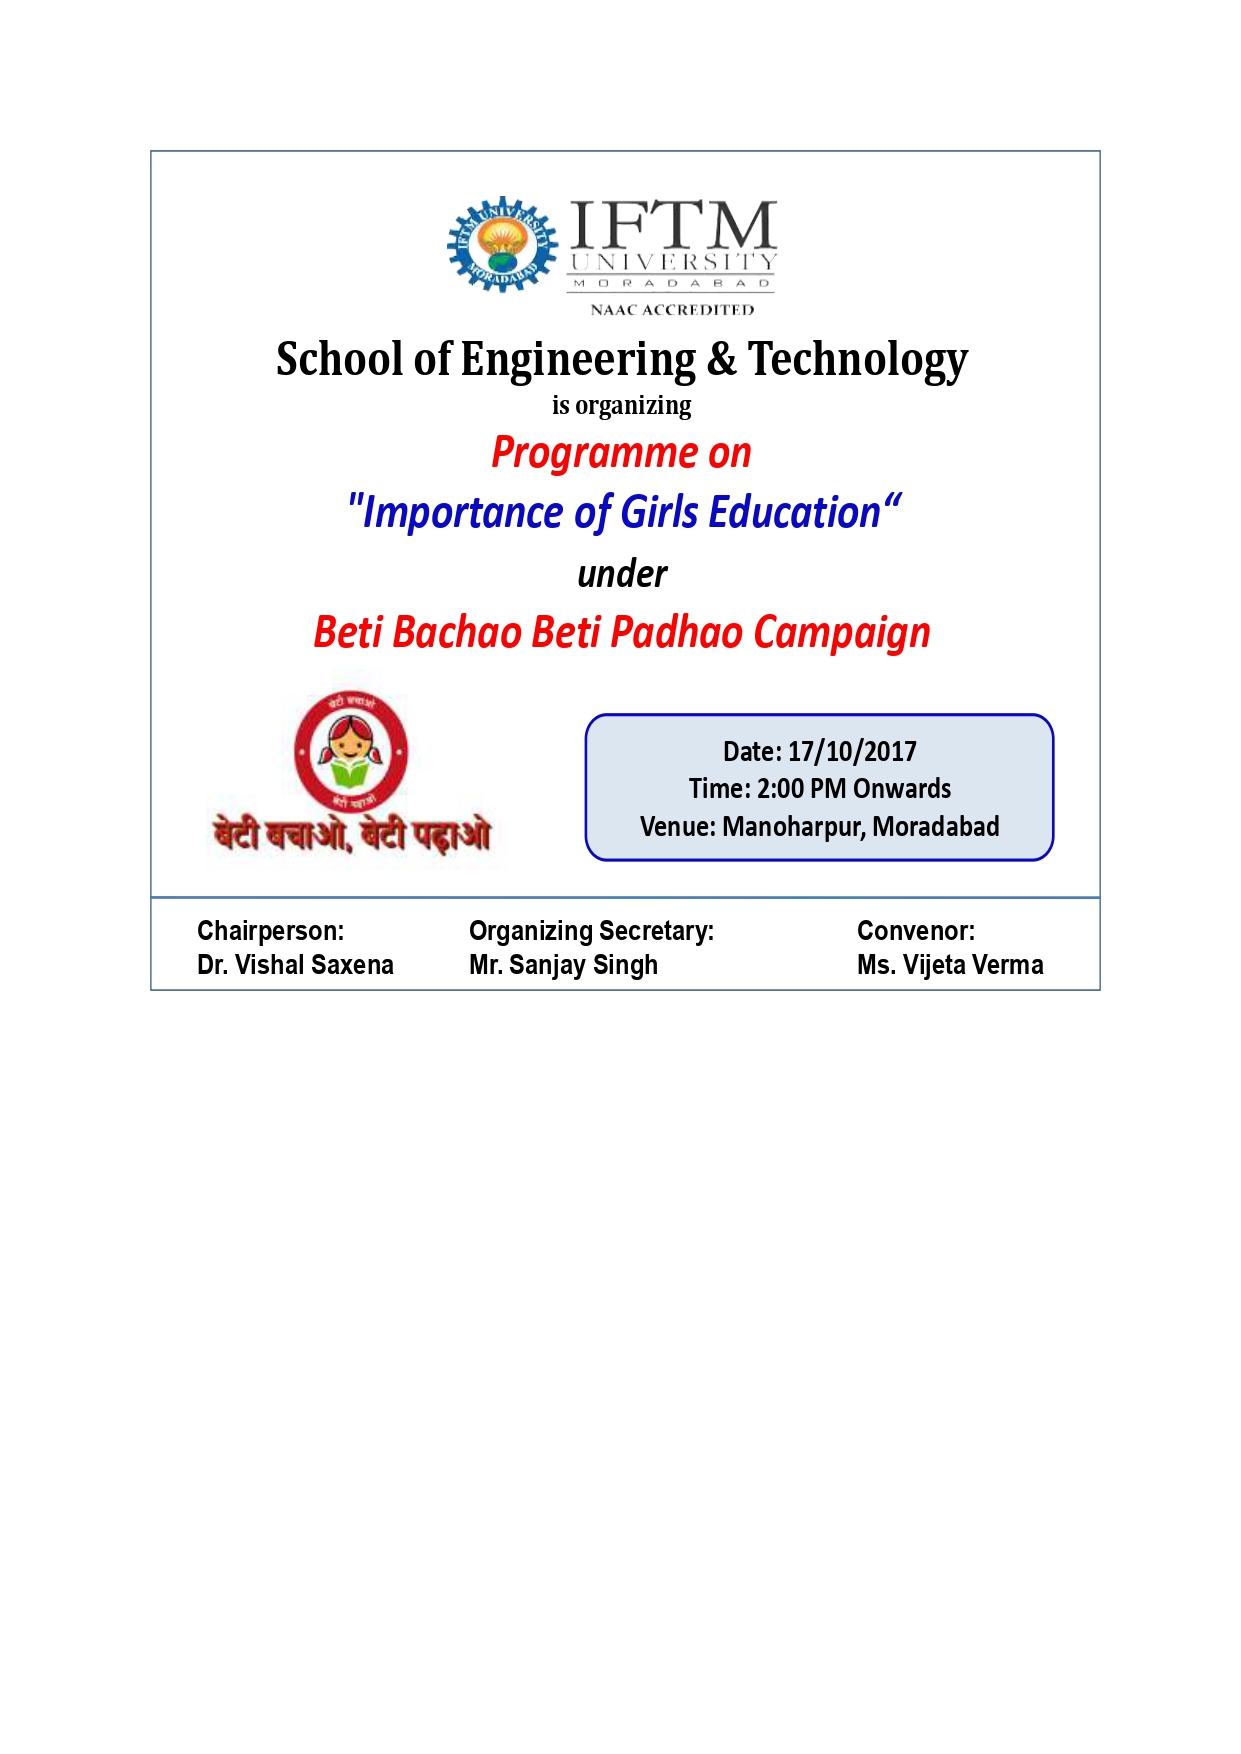 Programme on Importance of Girls Education under Beti Bachao Beti Padhao campaign